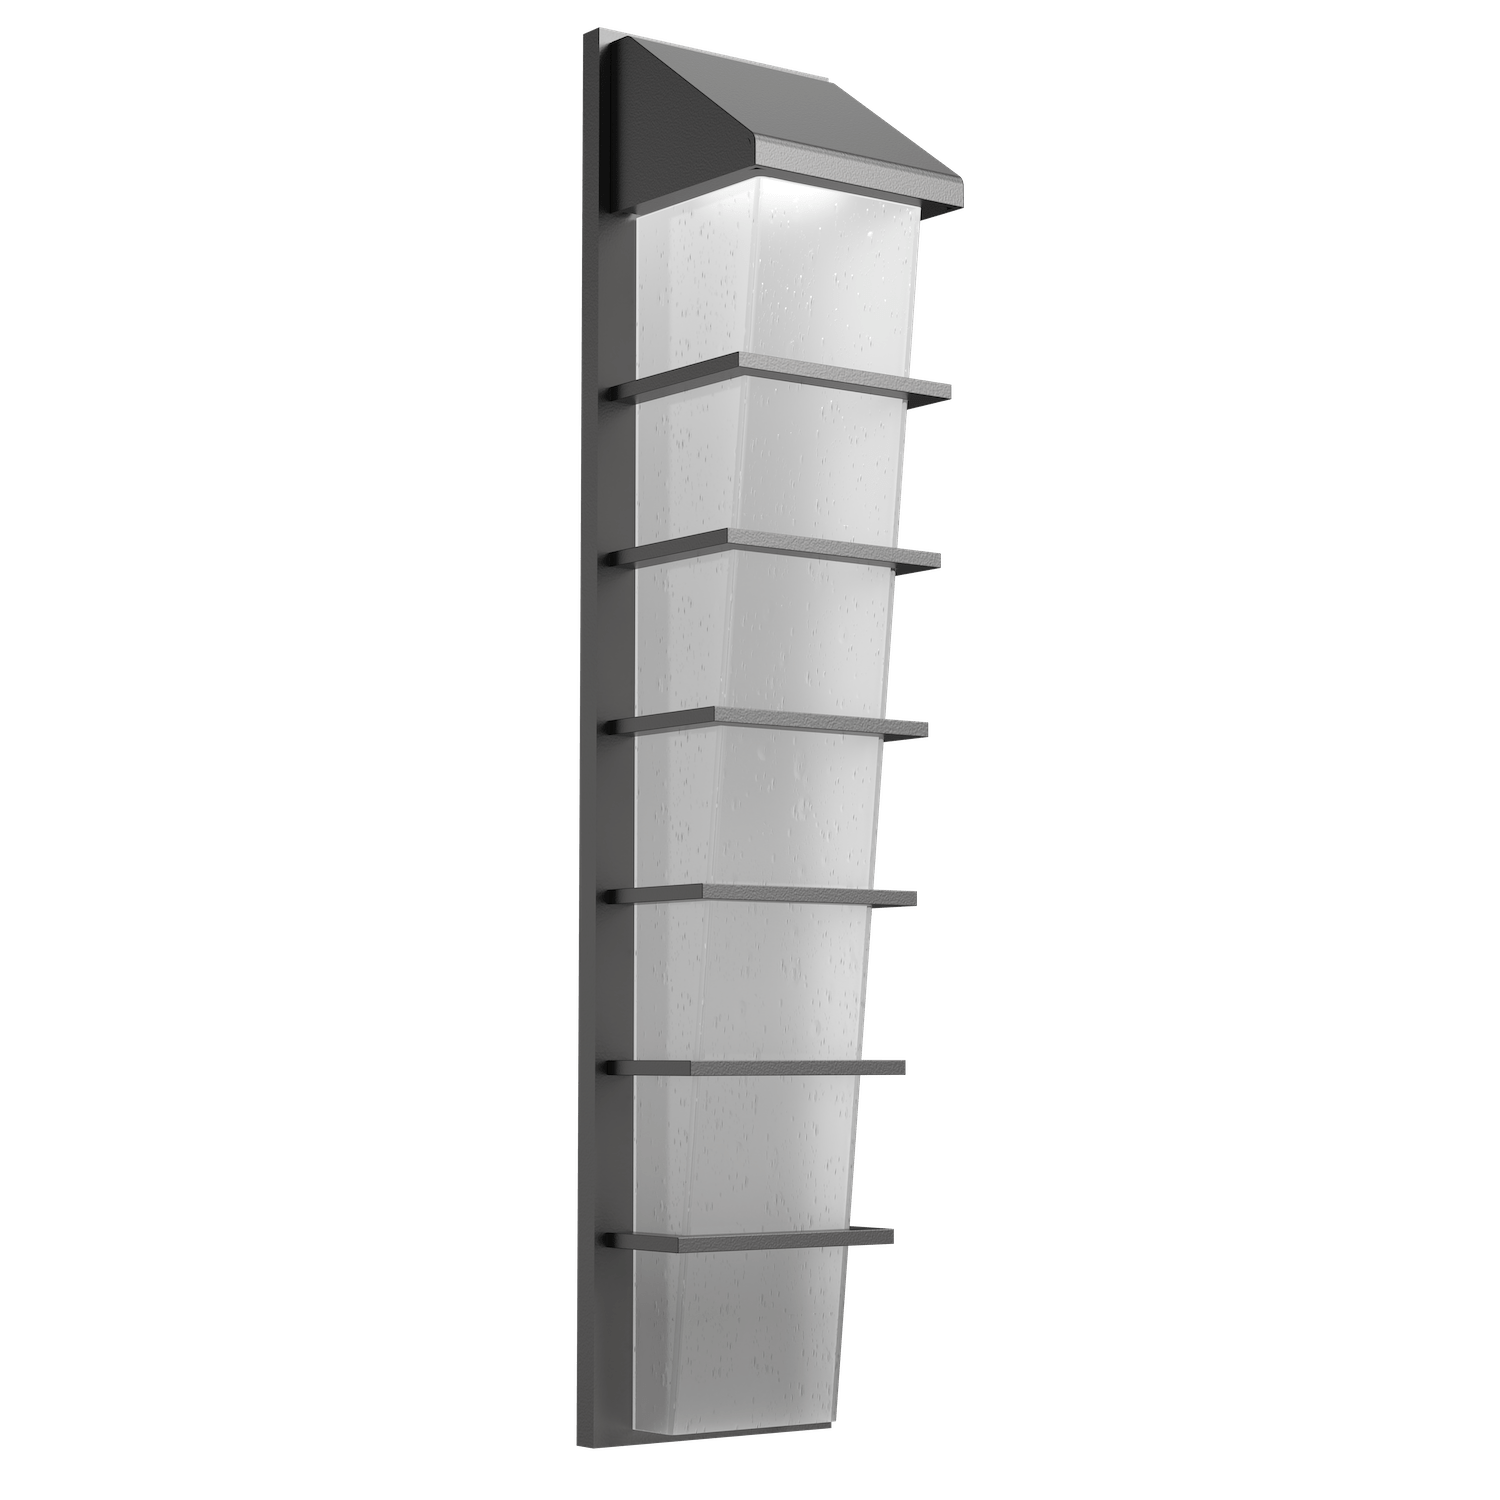 ODB0081-02-AG-FS-Hammerton-Studio-Mantle-24-inch-outdoor-sconce-with-argento-grey-finish-and-frosted-glass-shade-and-LED-lamping